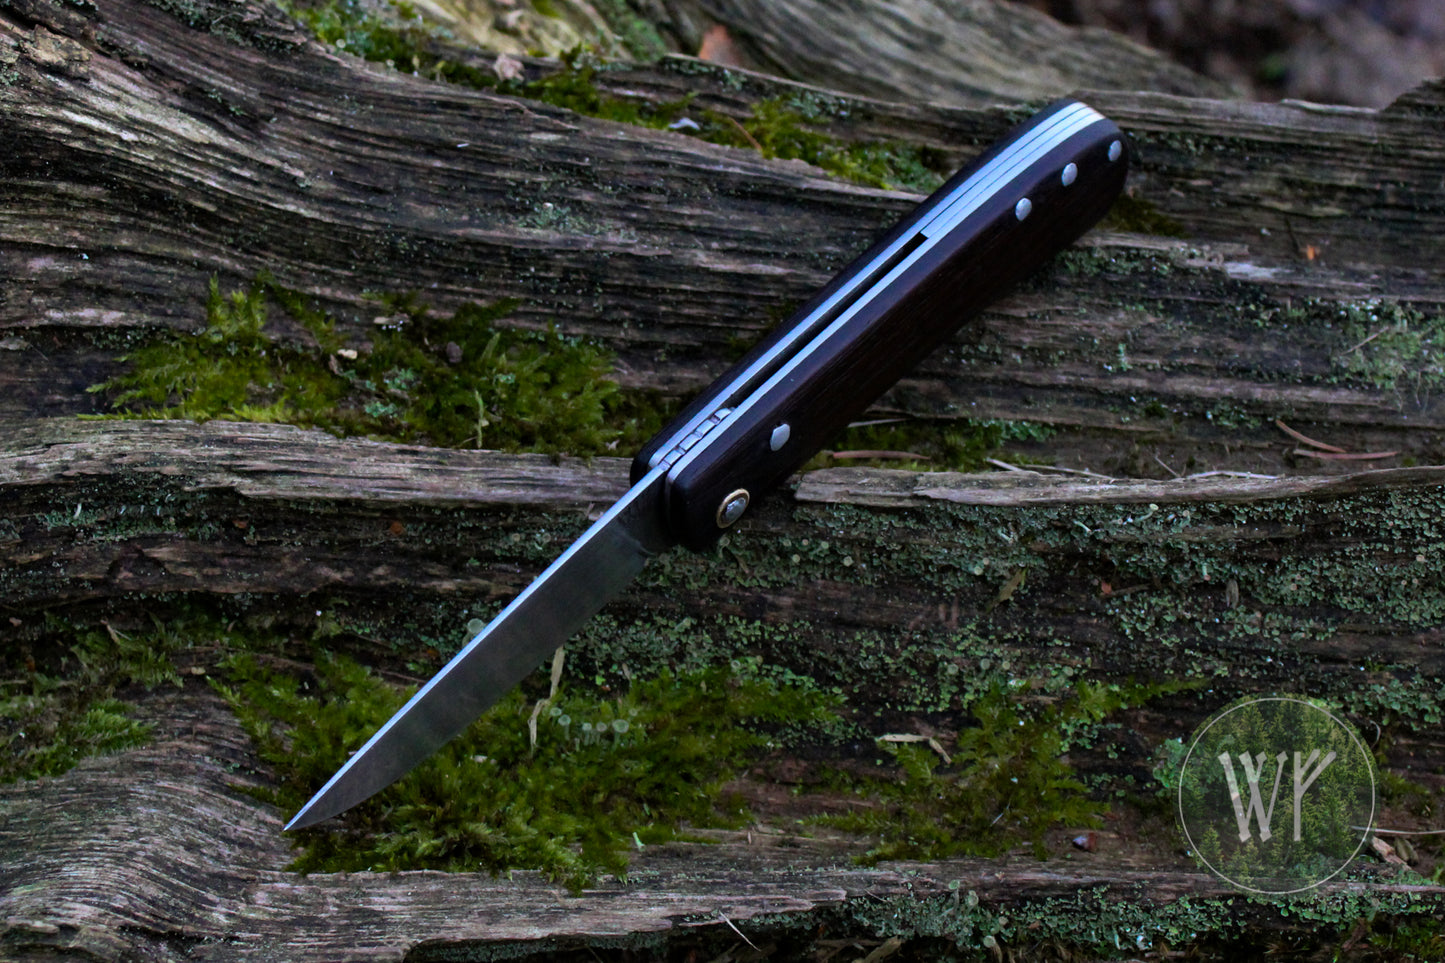 Hand-forged dual-detente folder with 01 Tool Steel blade, Titanium Liners and Rosewood Handle / Non-locking UK Legal Carry